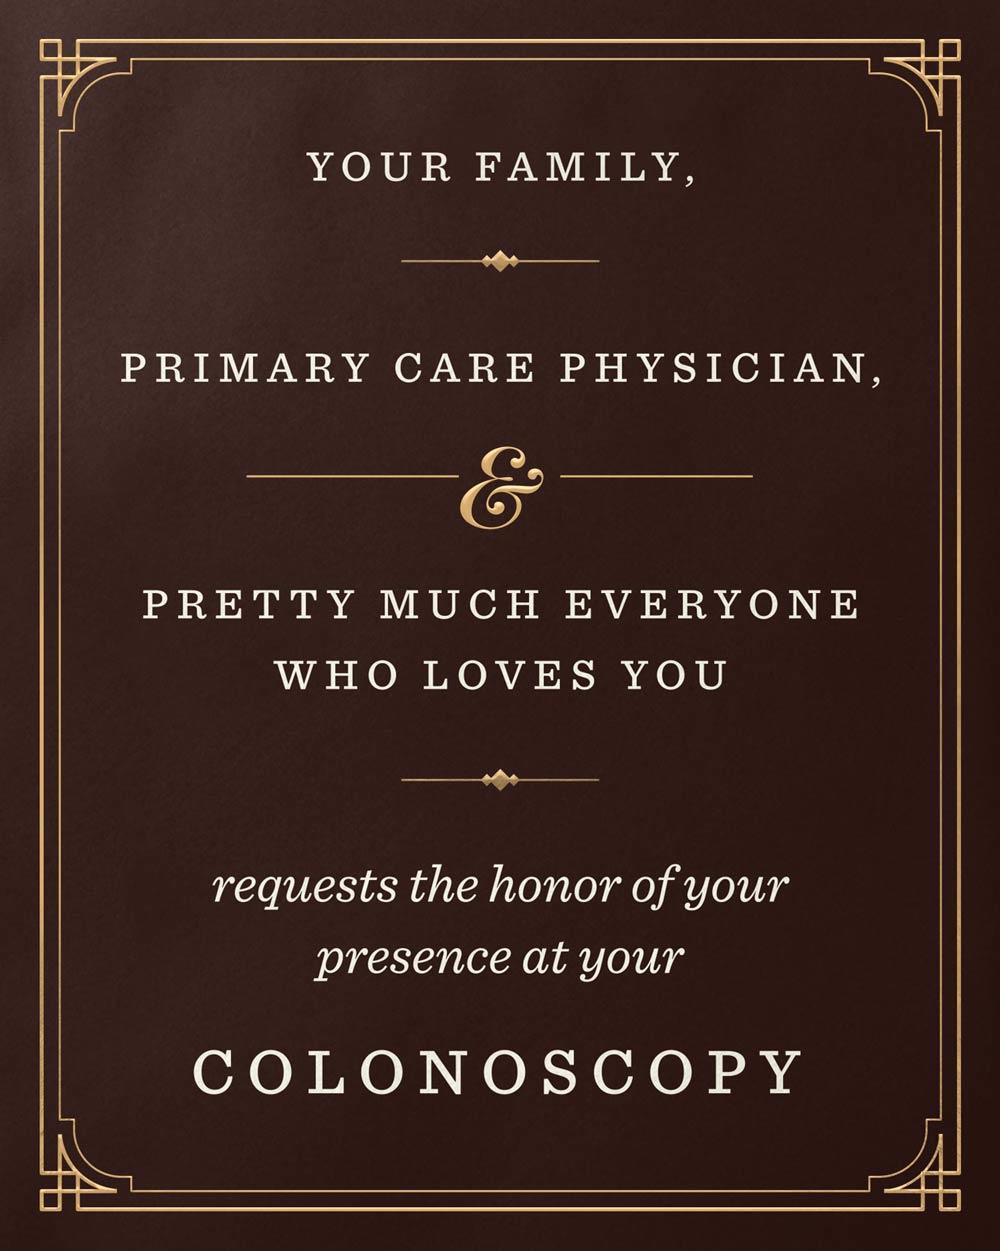 Your Family, Primary Care Physician, & Pretty Much Everyone Who Loves You requests the honor of your presence at your colonoscopy.